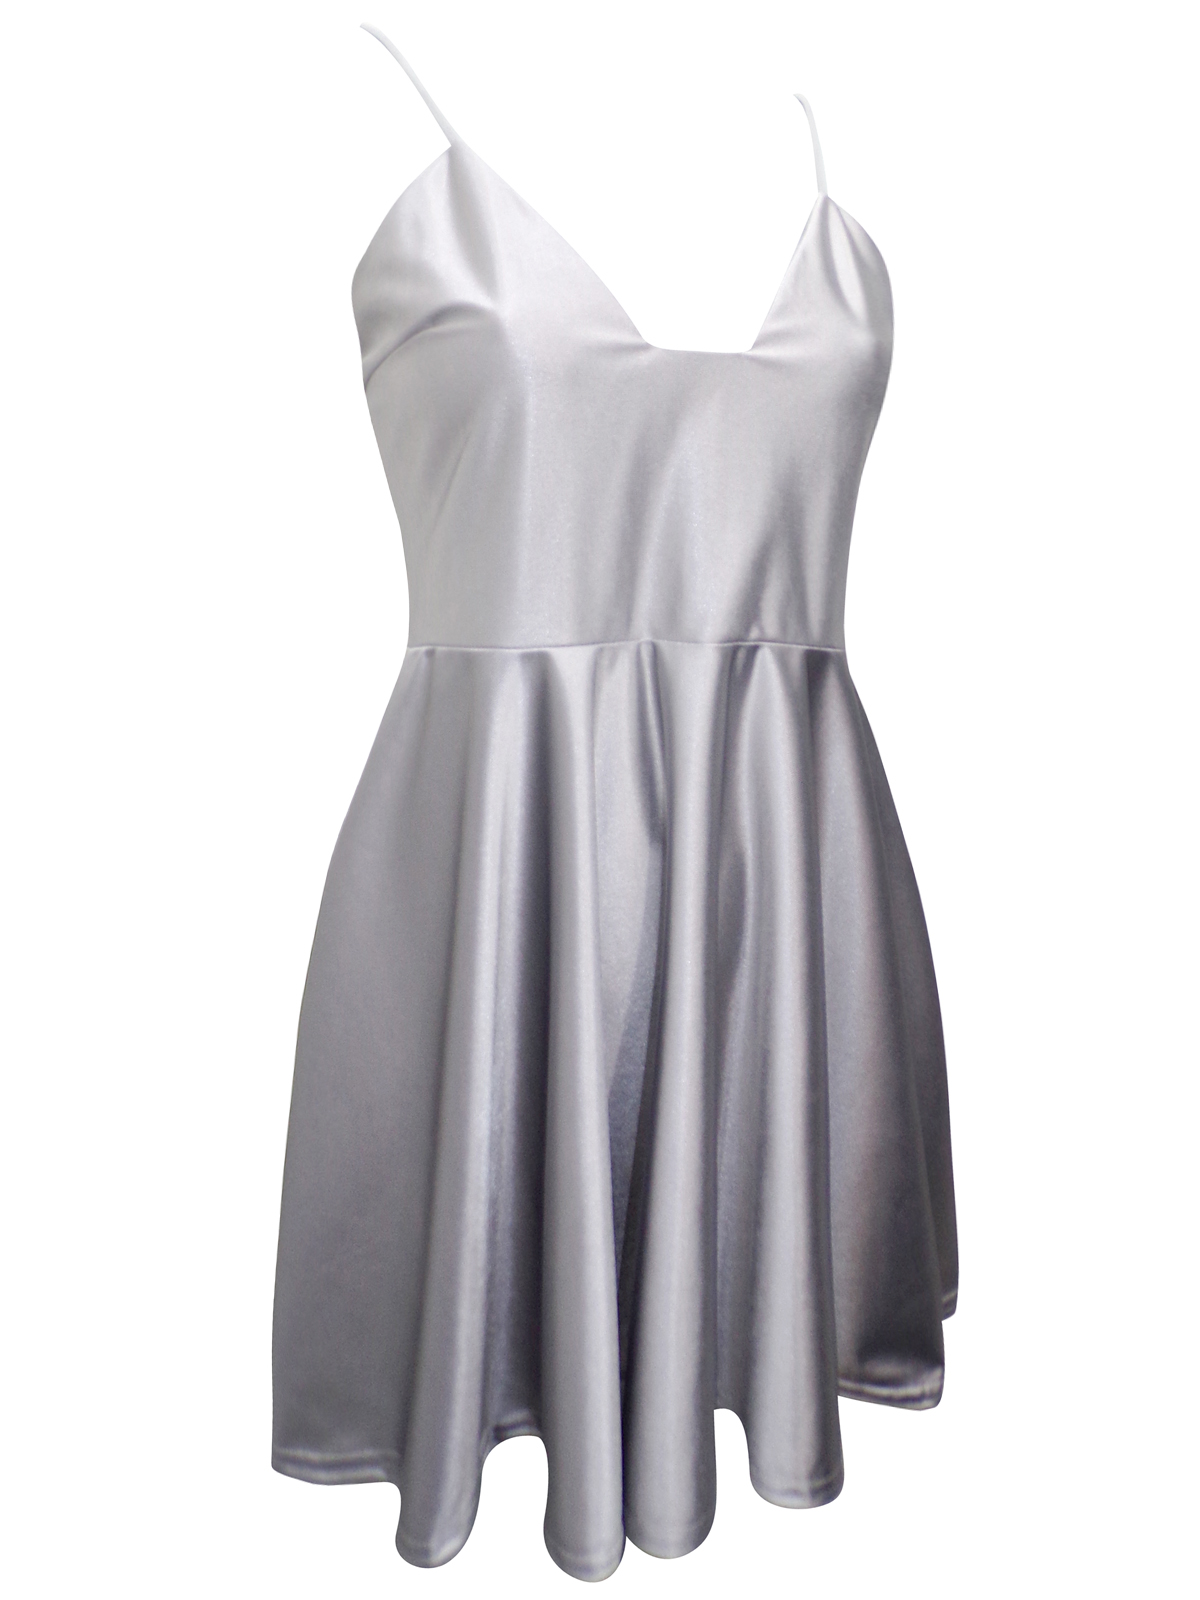 BOOHOO - - B00H00 SILVER Metallic Fit & Flare Dress - Size 8 to 14